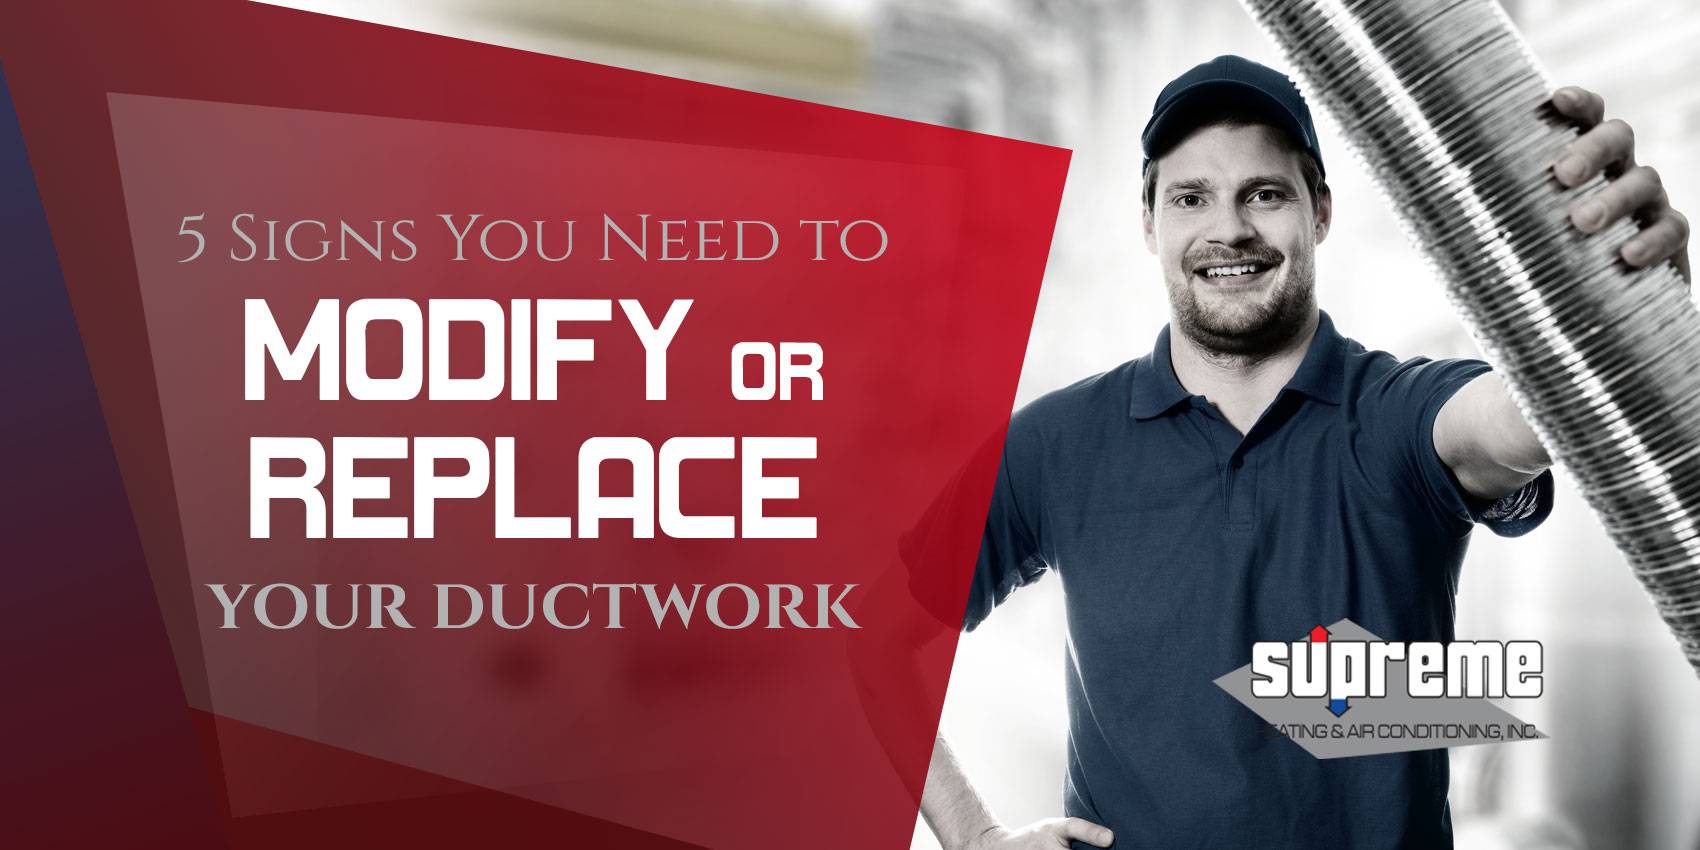 5 Signs You Need to Modify or Replace Your Ductwork